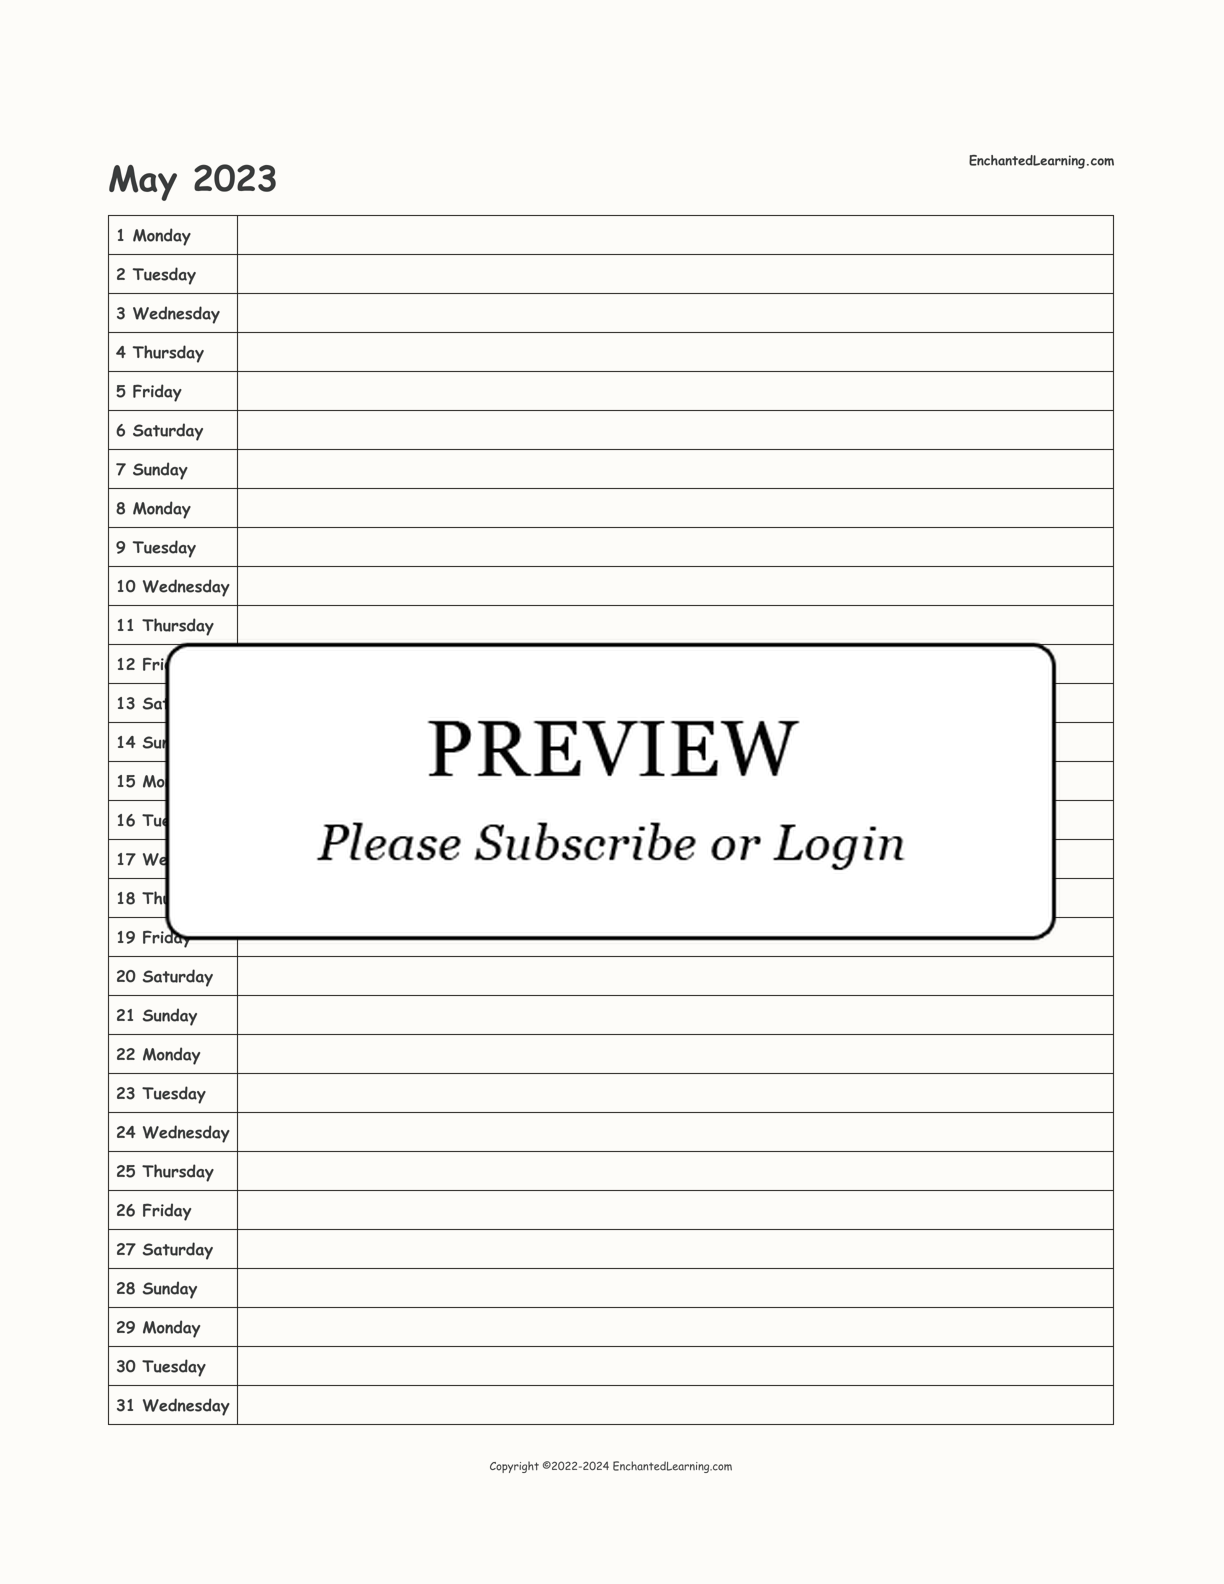 2023 Scheduling Calendar interactive printout page 5